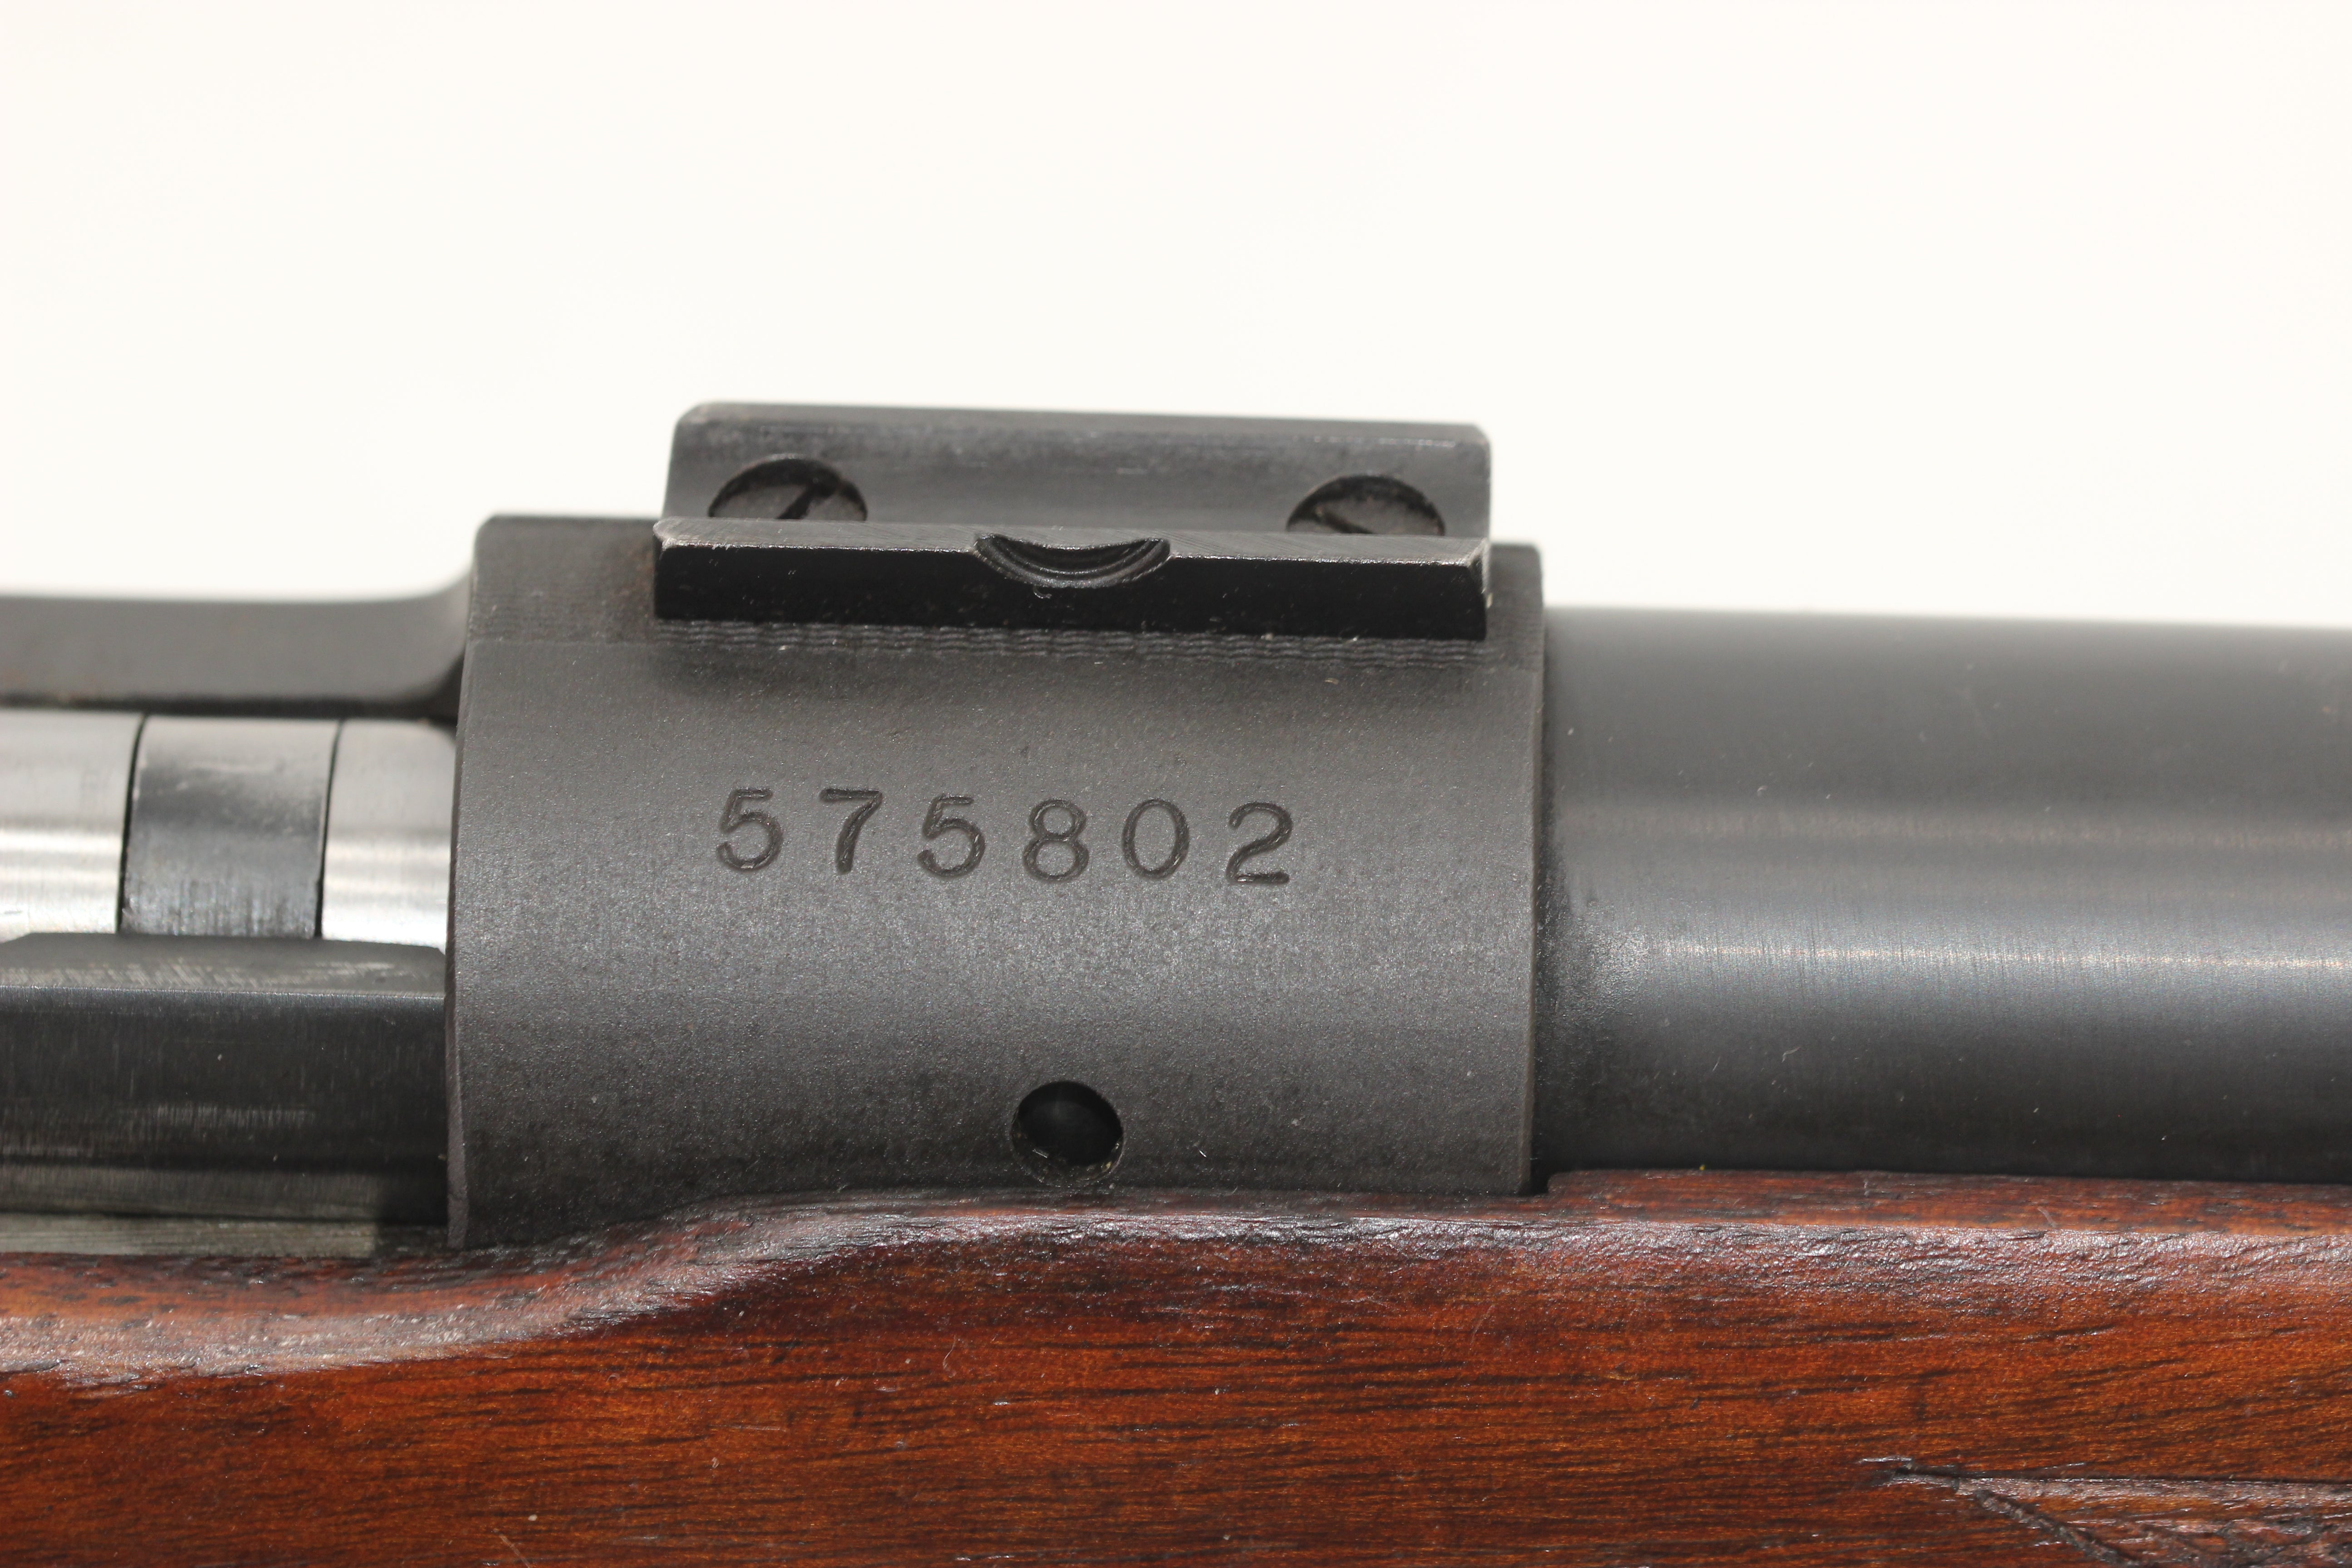 .220 Swift Varmint Rifles - Matched Pair with Sequential Serial Numbers - 1963